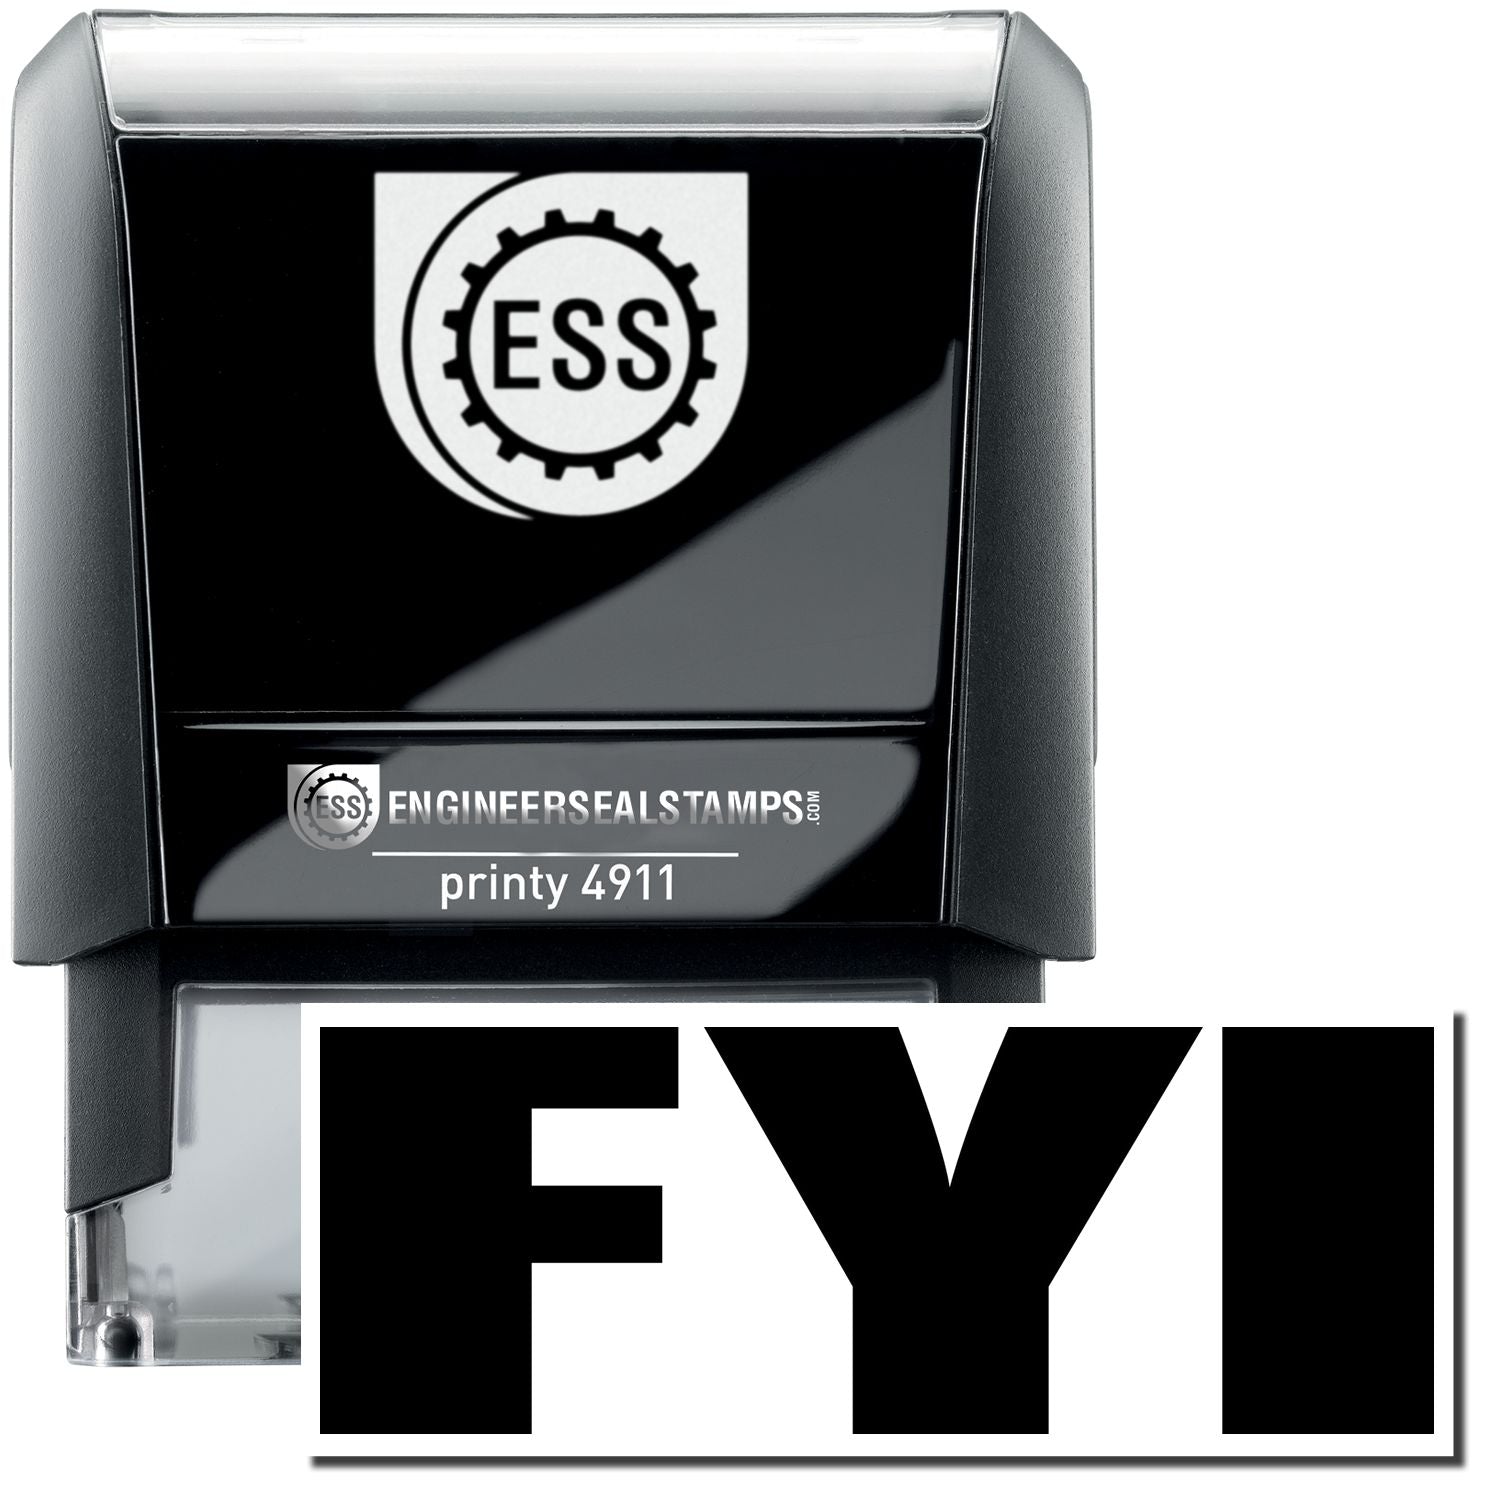 A self-inking stamp with a stamped image showing how the text "FYI" in bold font is displayed after stamping.